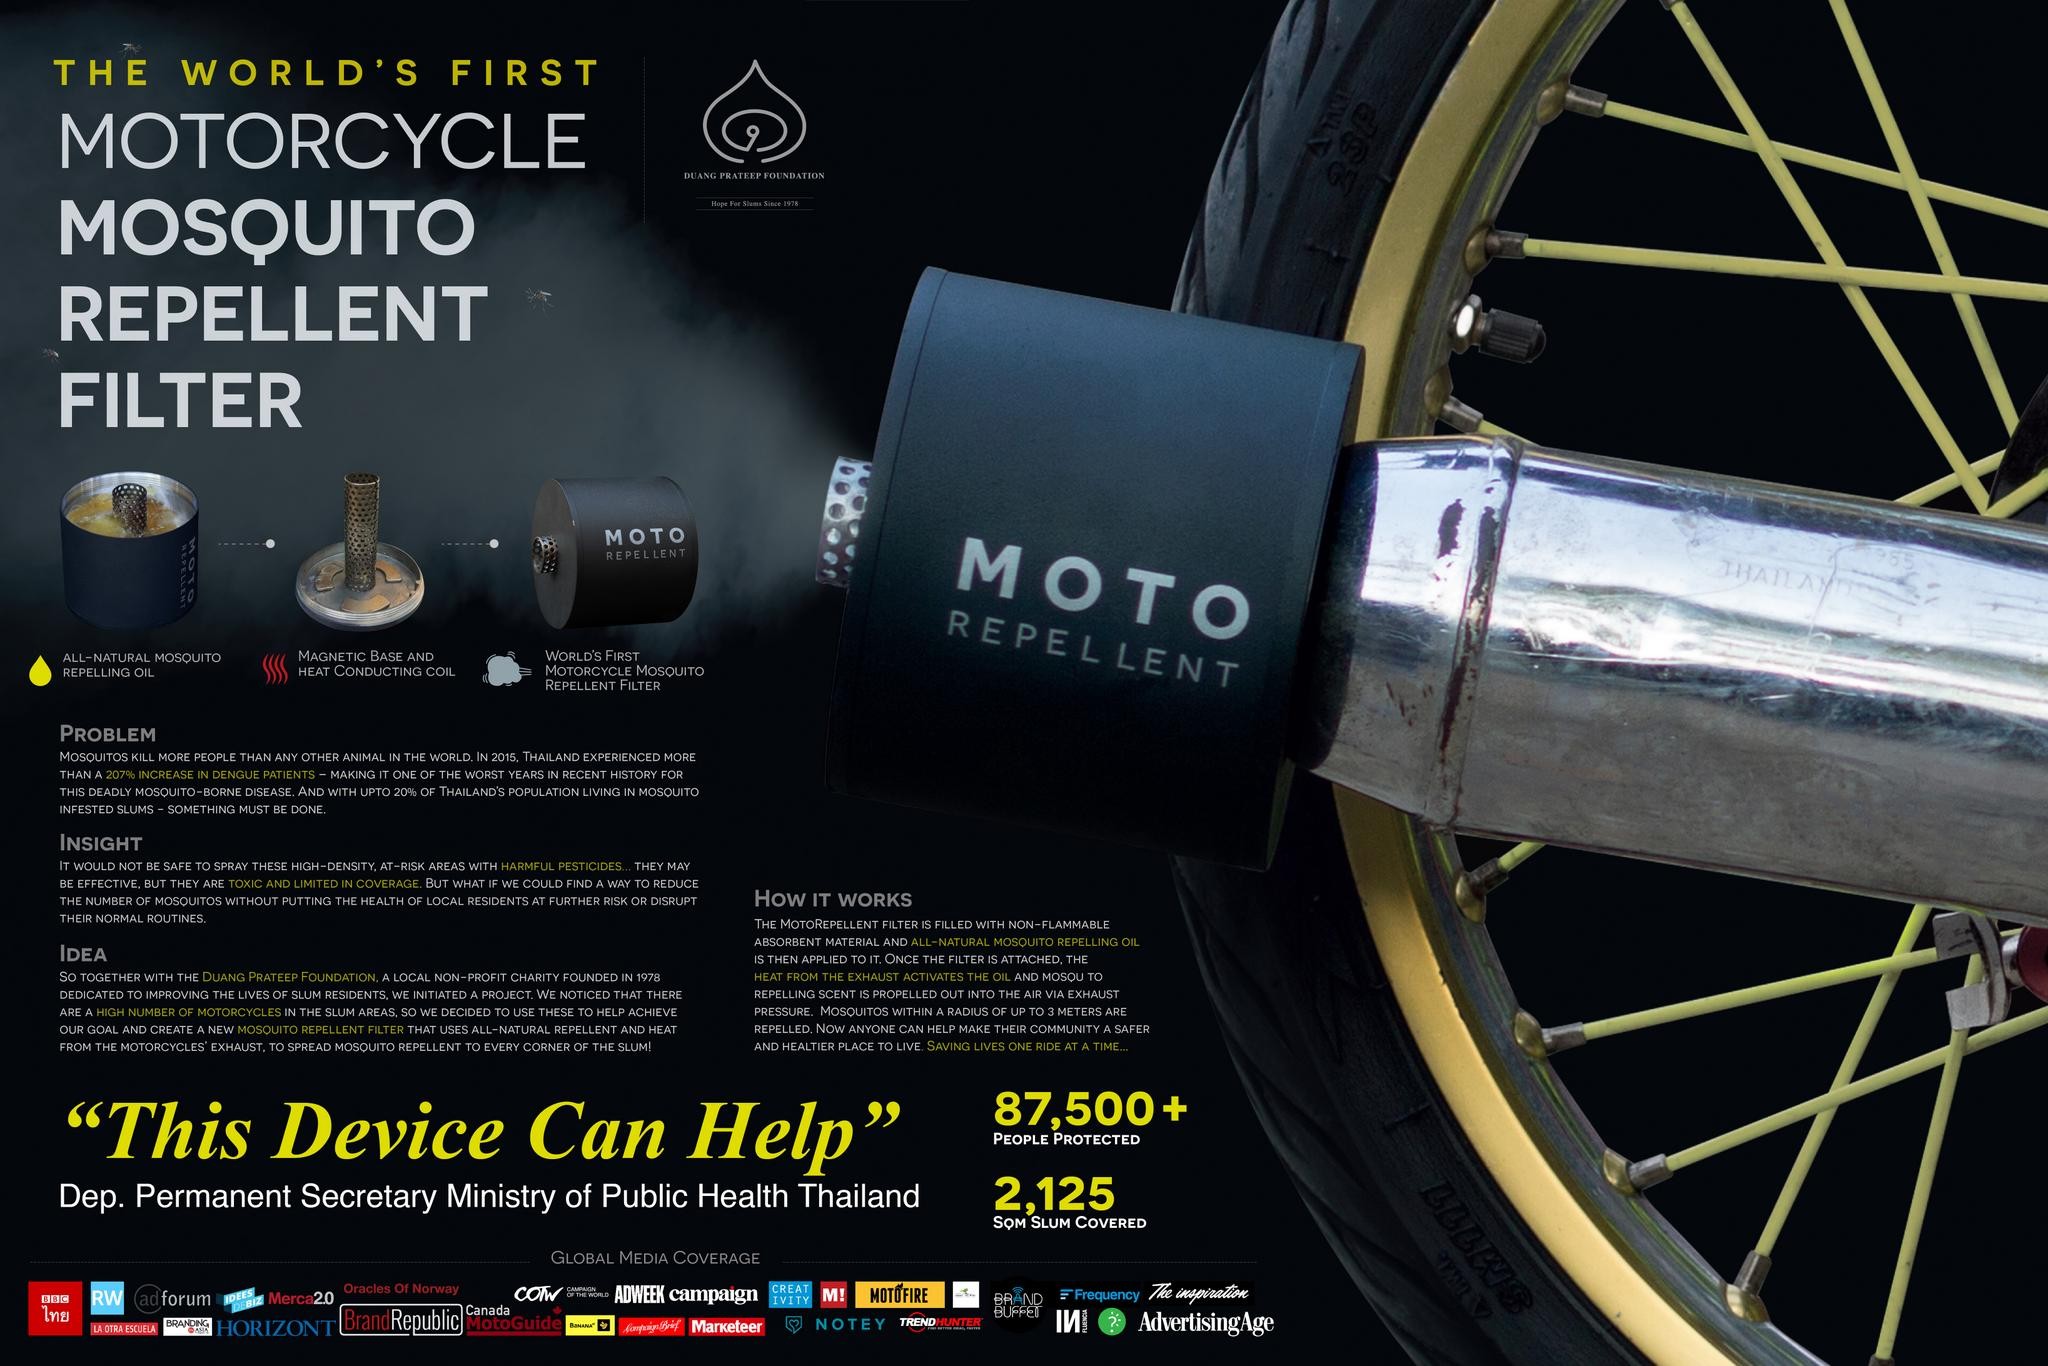 MotoRepellent: Saving Lives One Ride At A Time